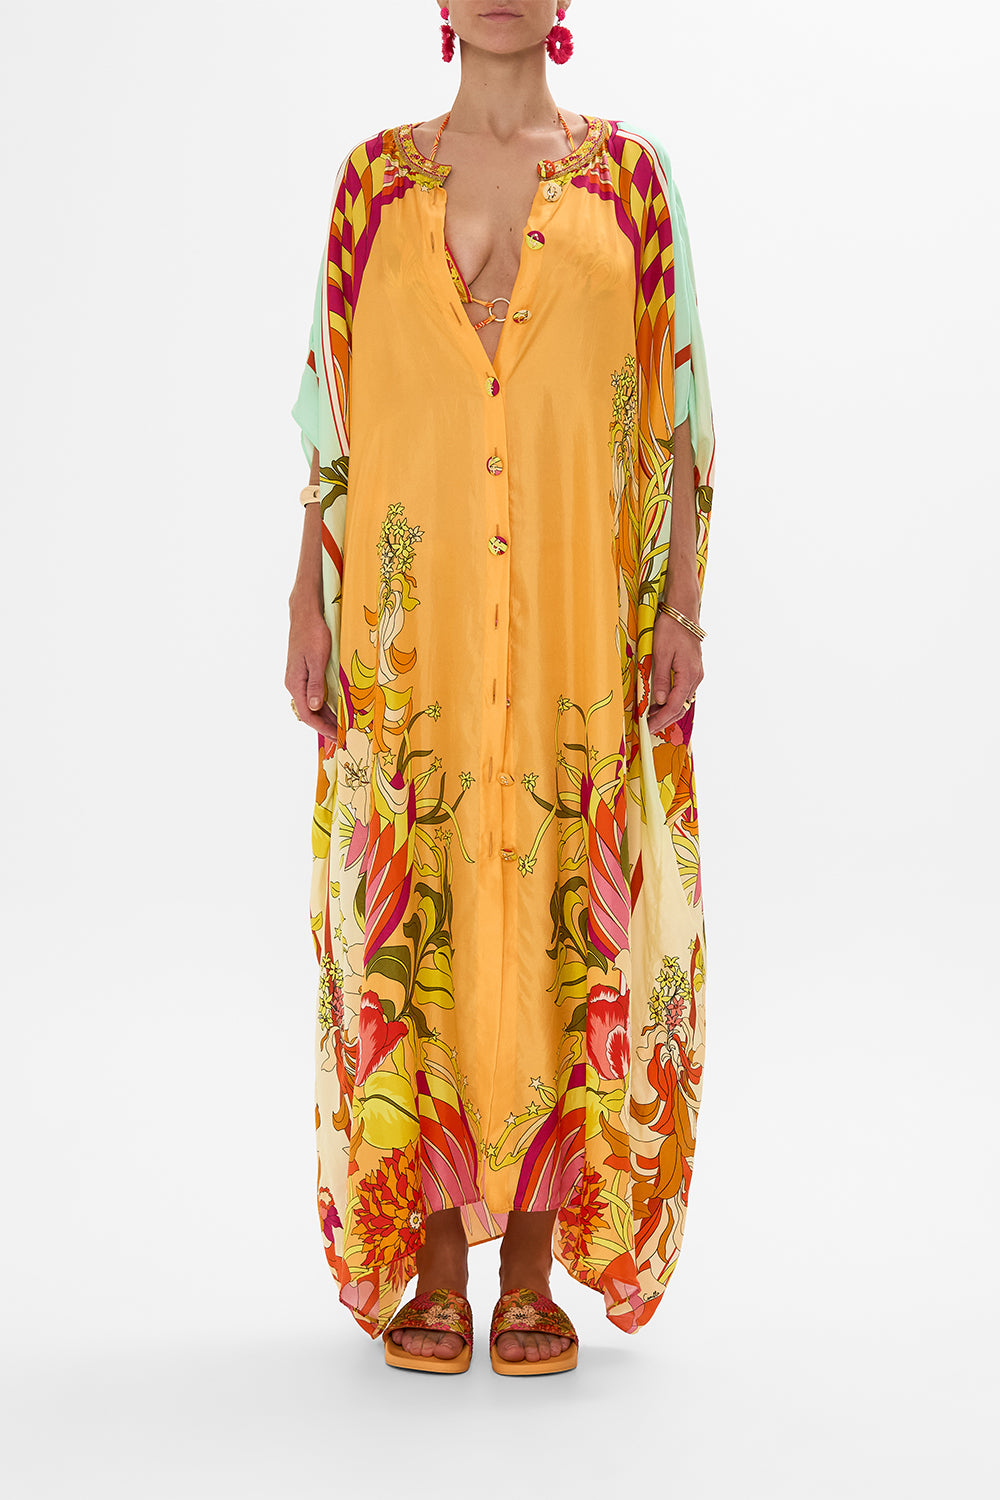 CAMILLA Floral Button Through Batwing Kaftan in The Flower Child Society